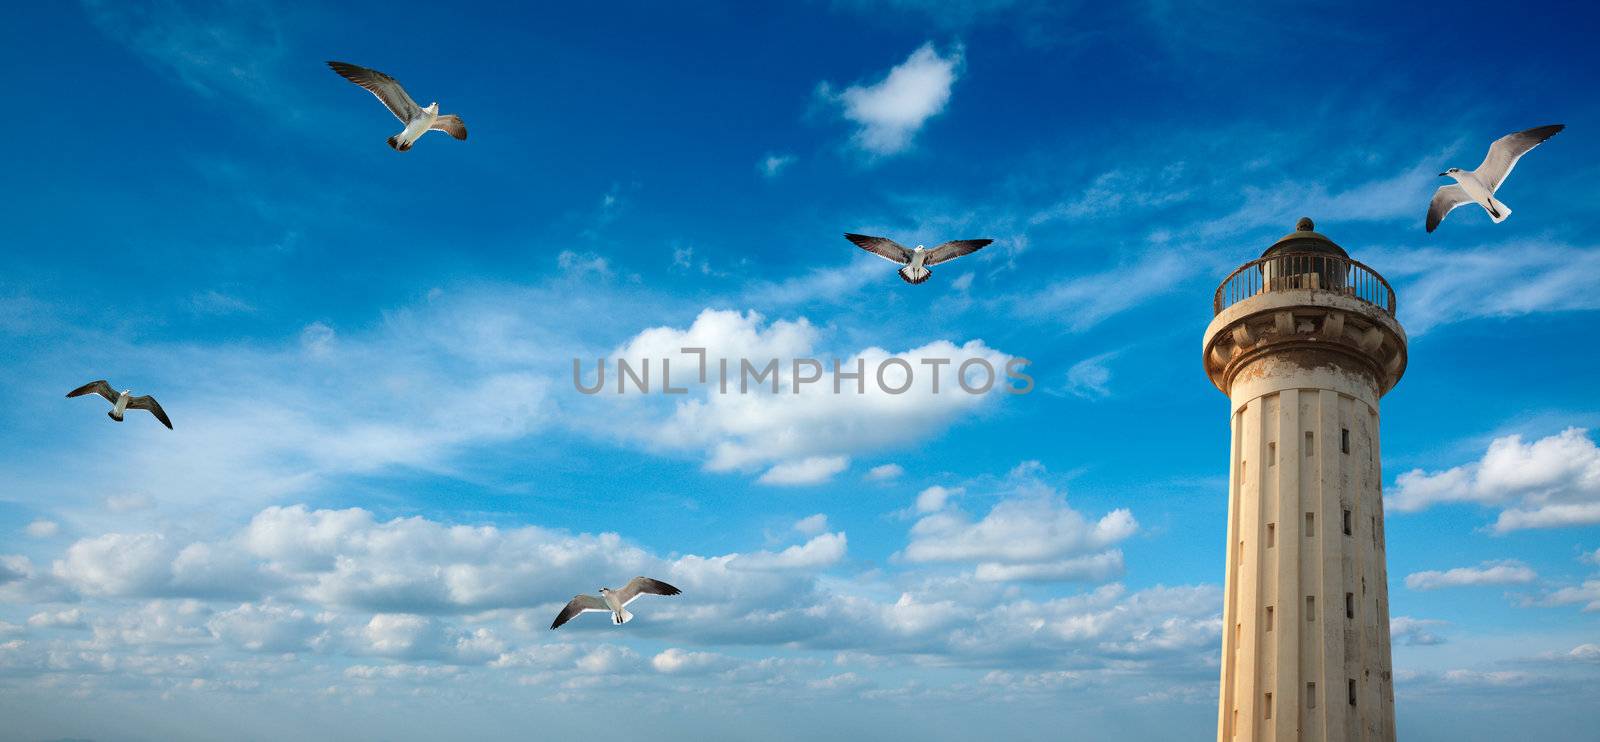 Old lighthouse in the blue sky with flying seagulls